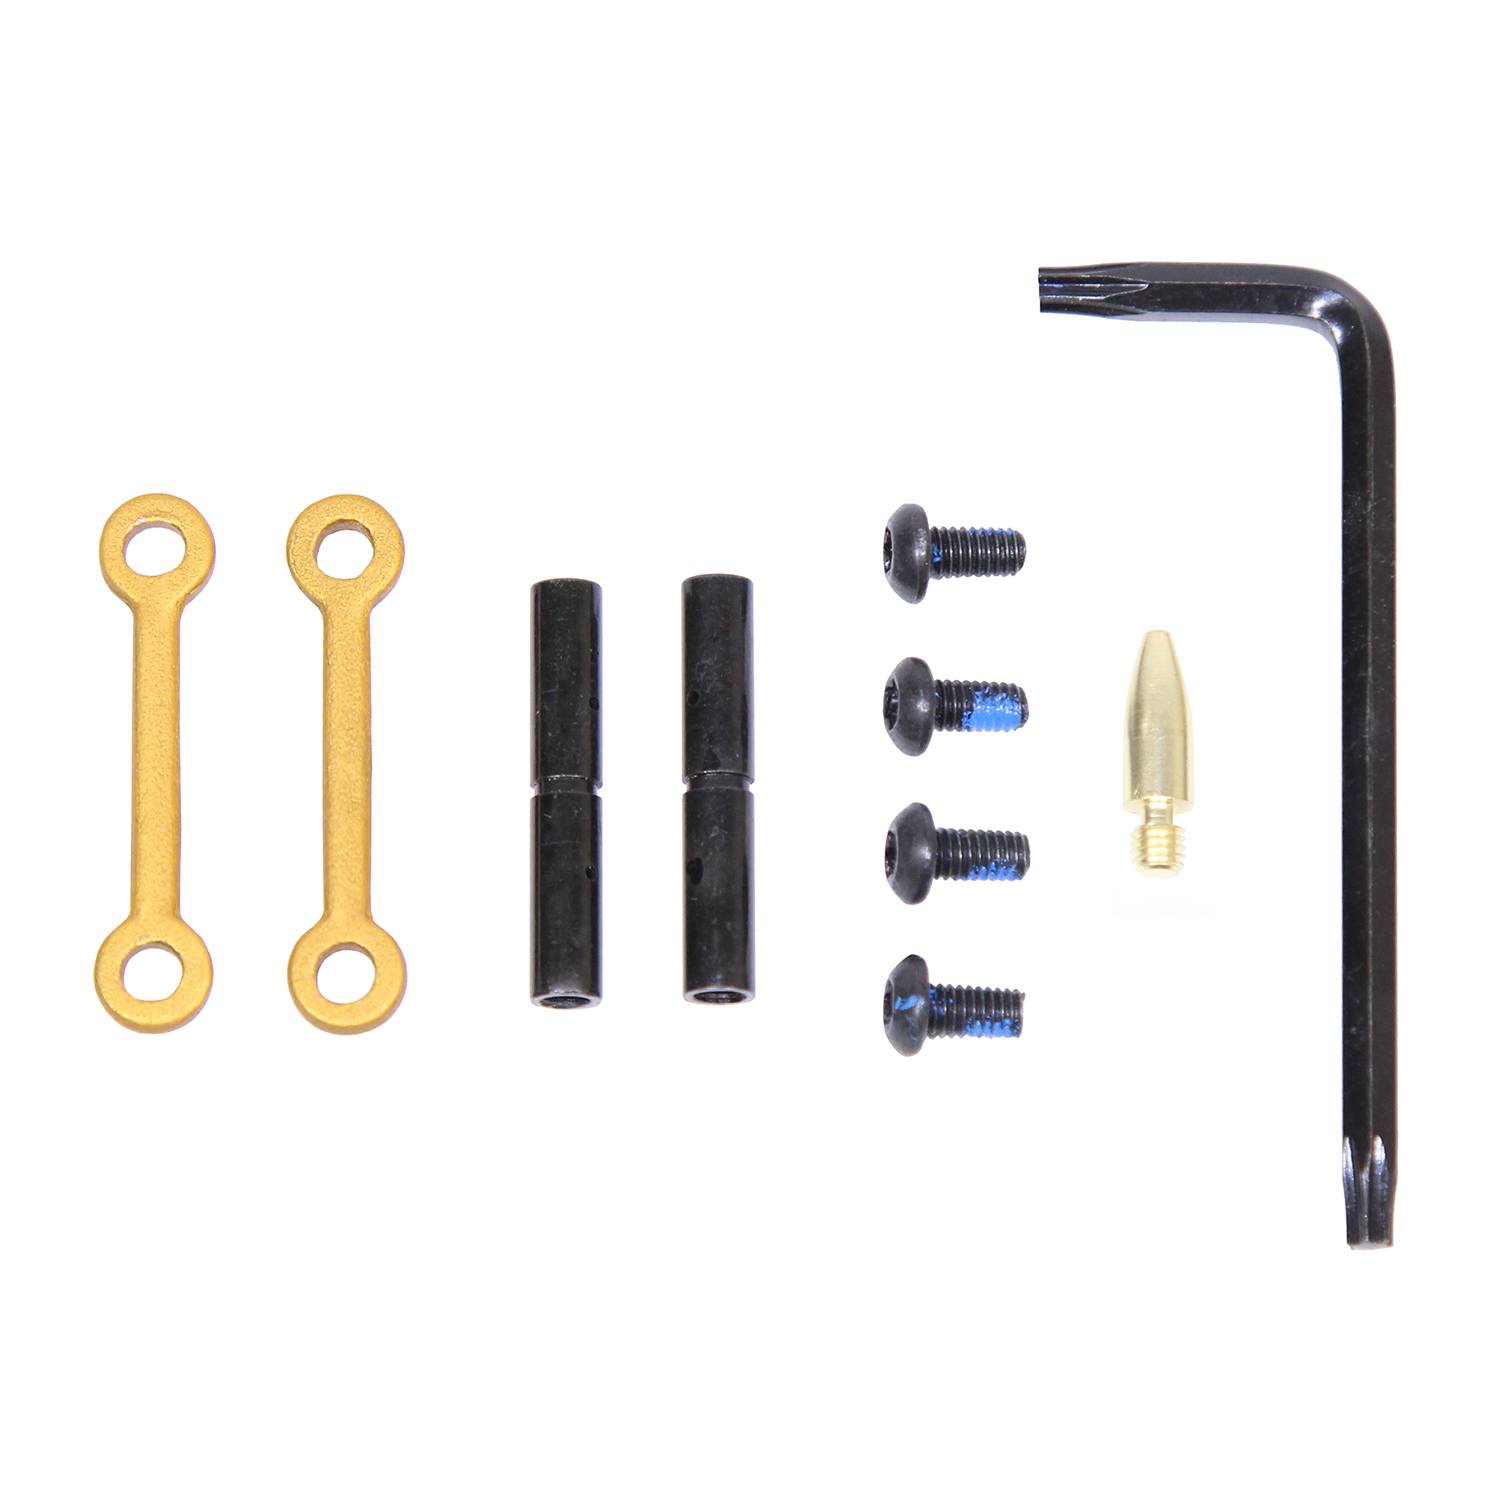 Gold Anti Rotation pin set for AR-15